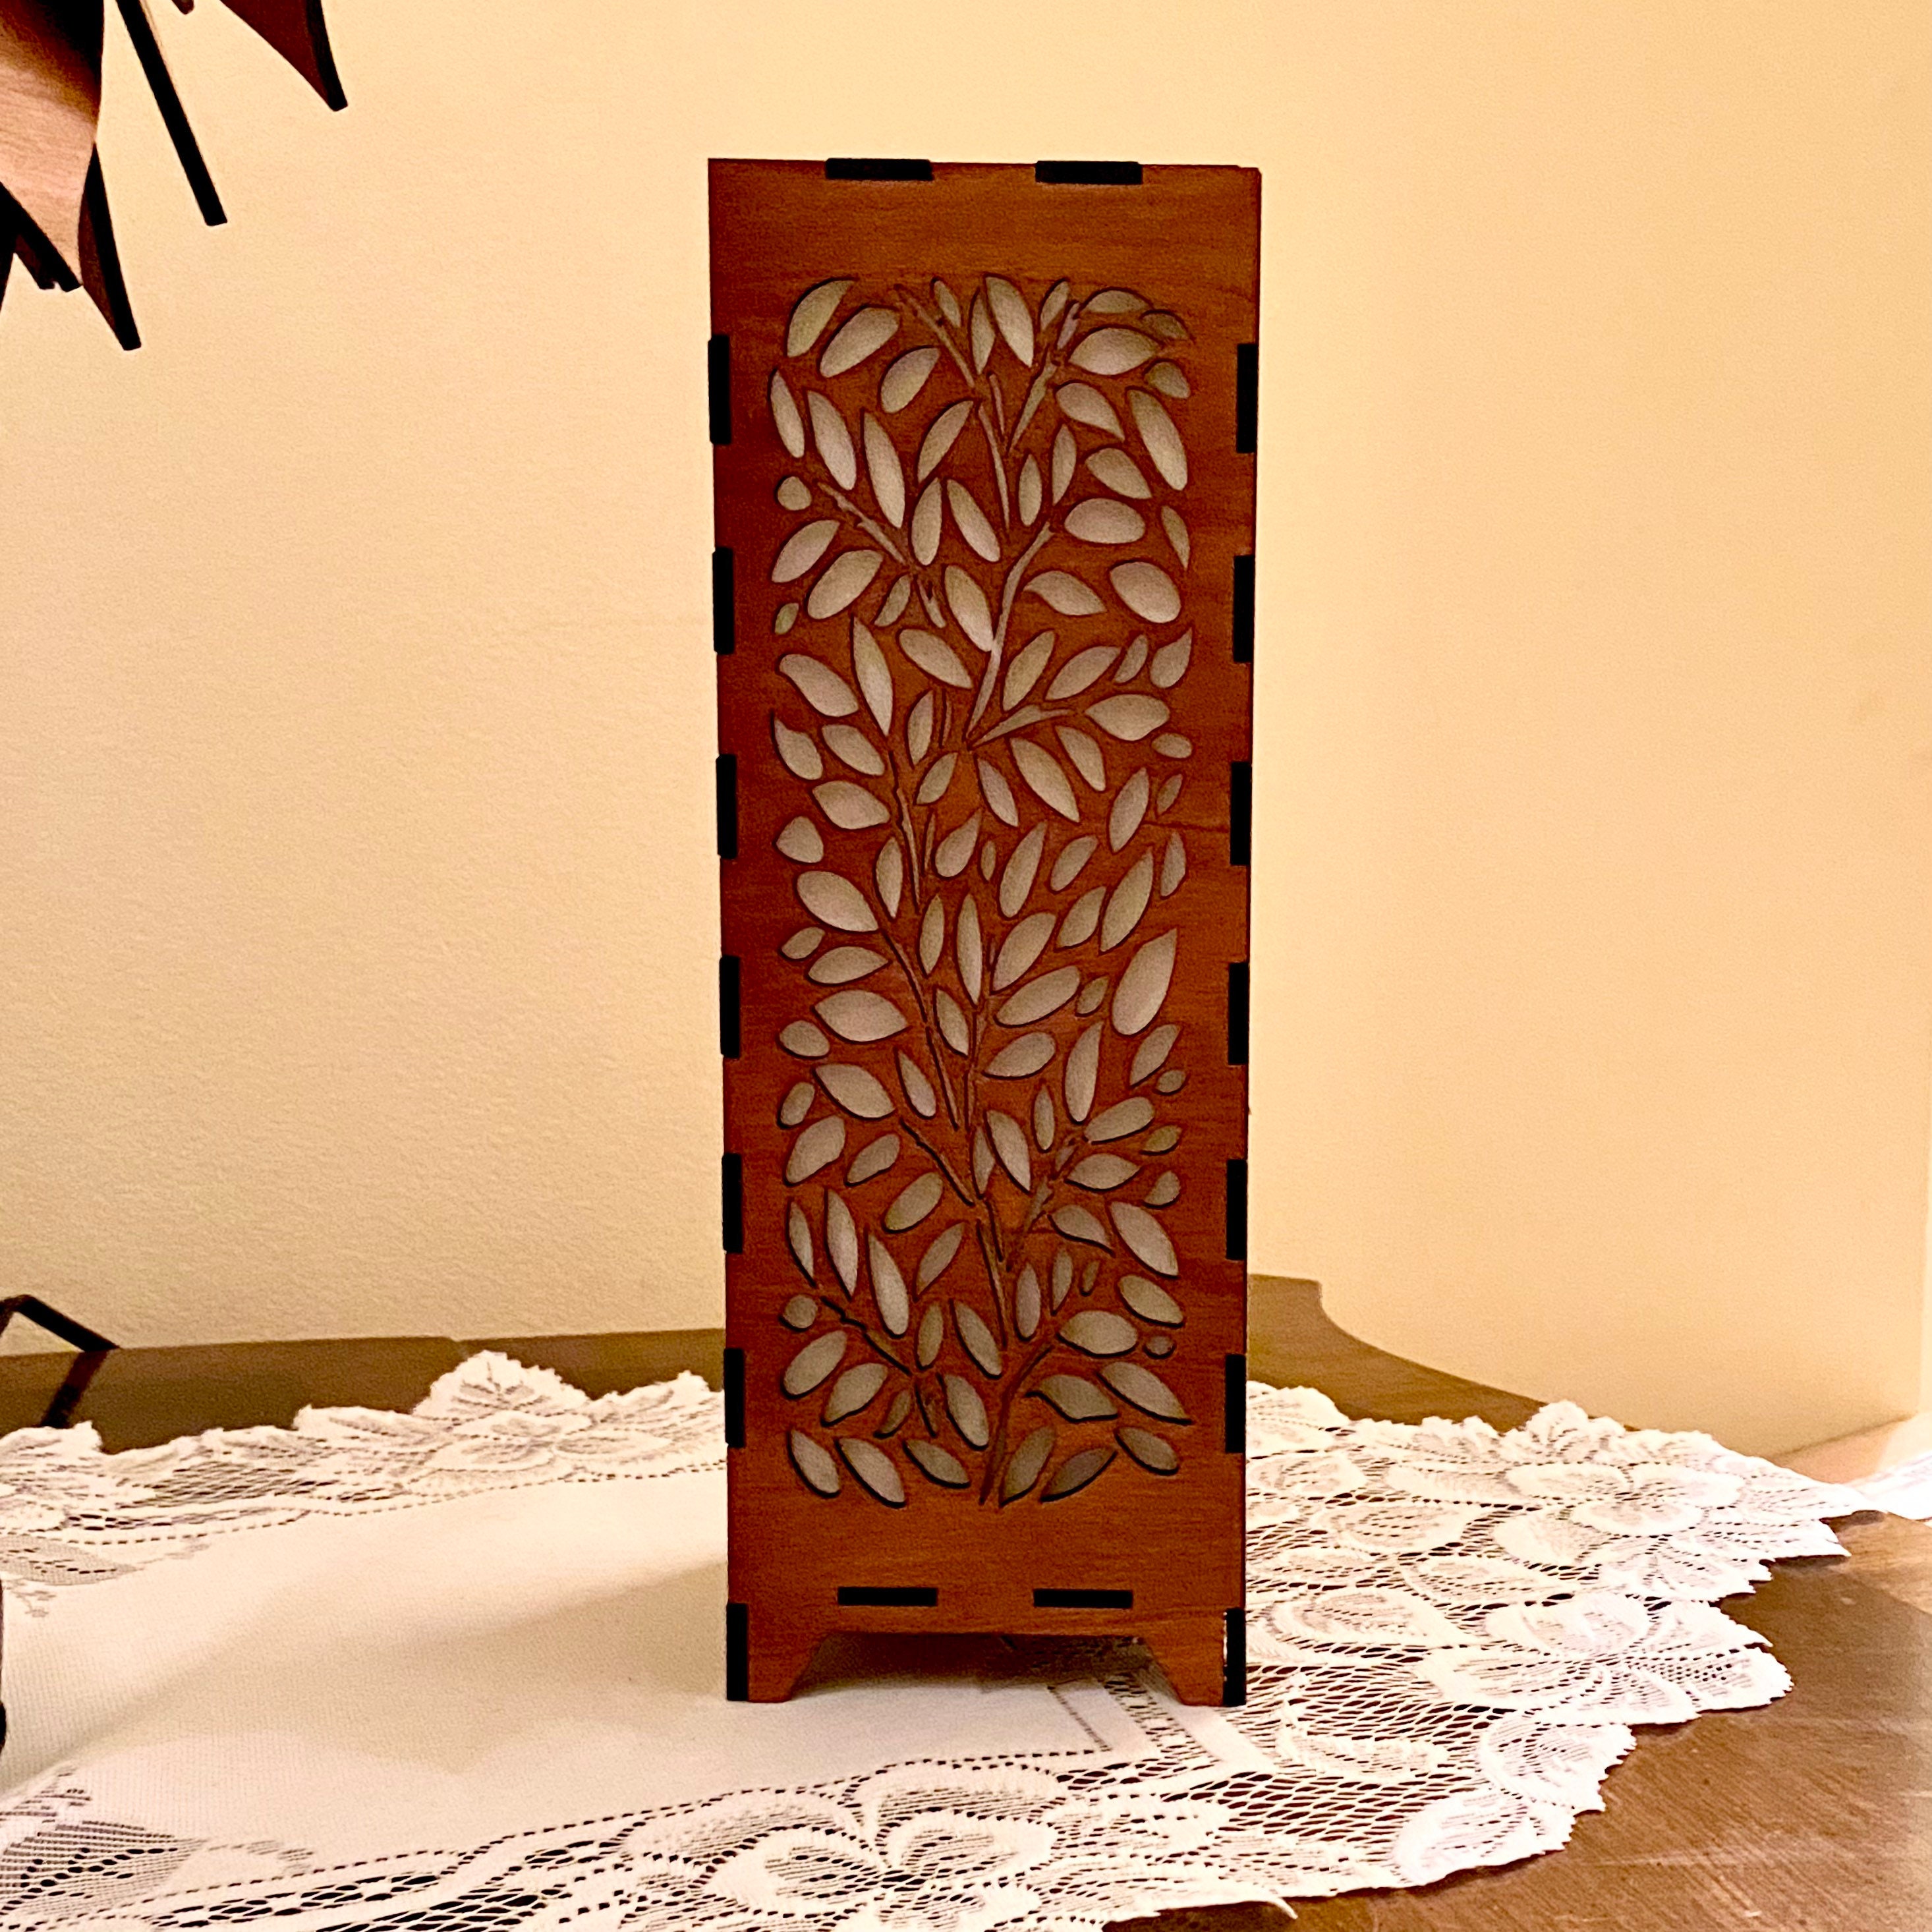 The Leaf Decorated Wooden Table Lamp Light Box Laser Cut 